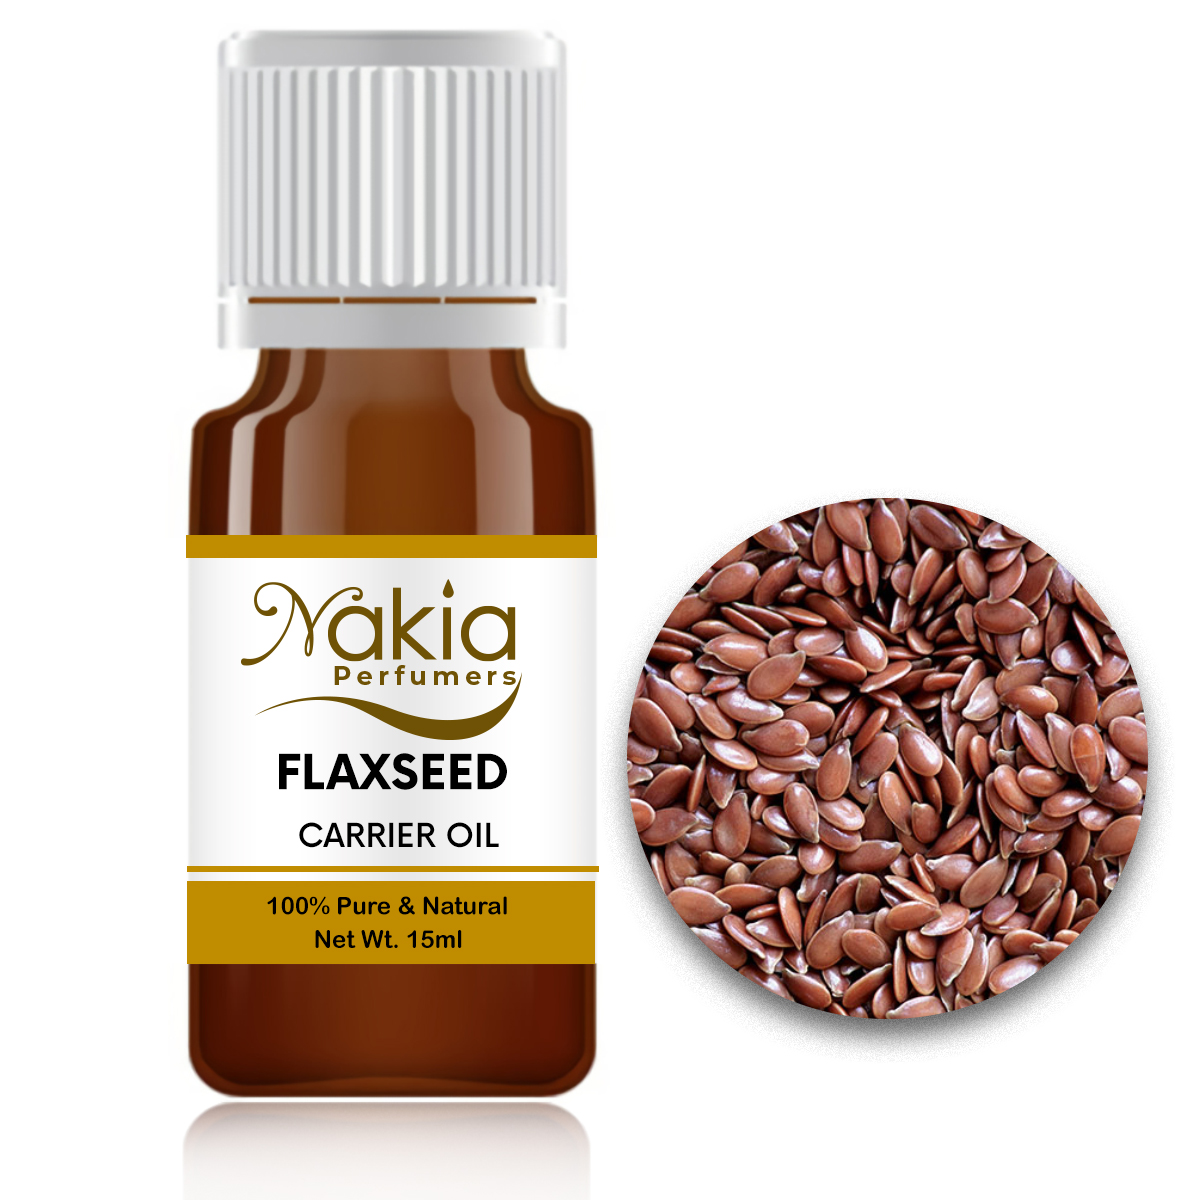 FLAXSEED CARRIER OIL